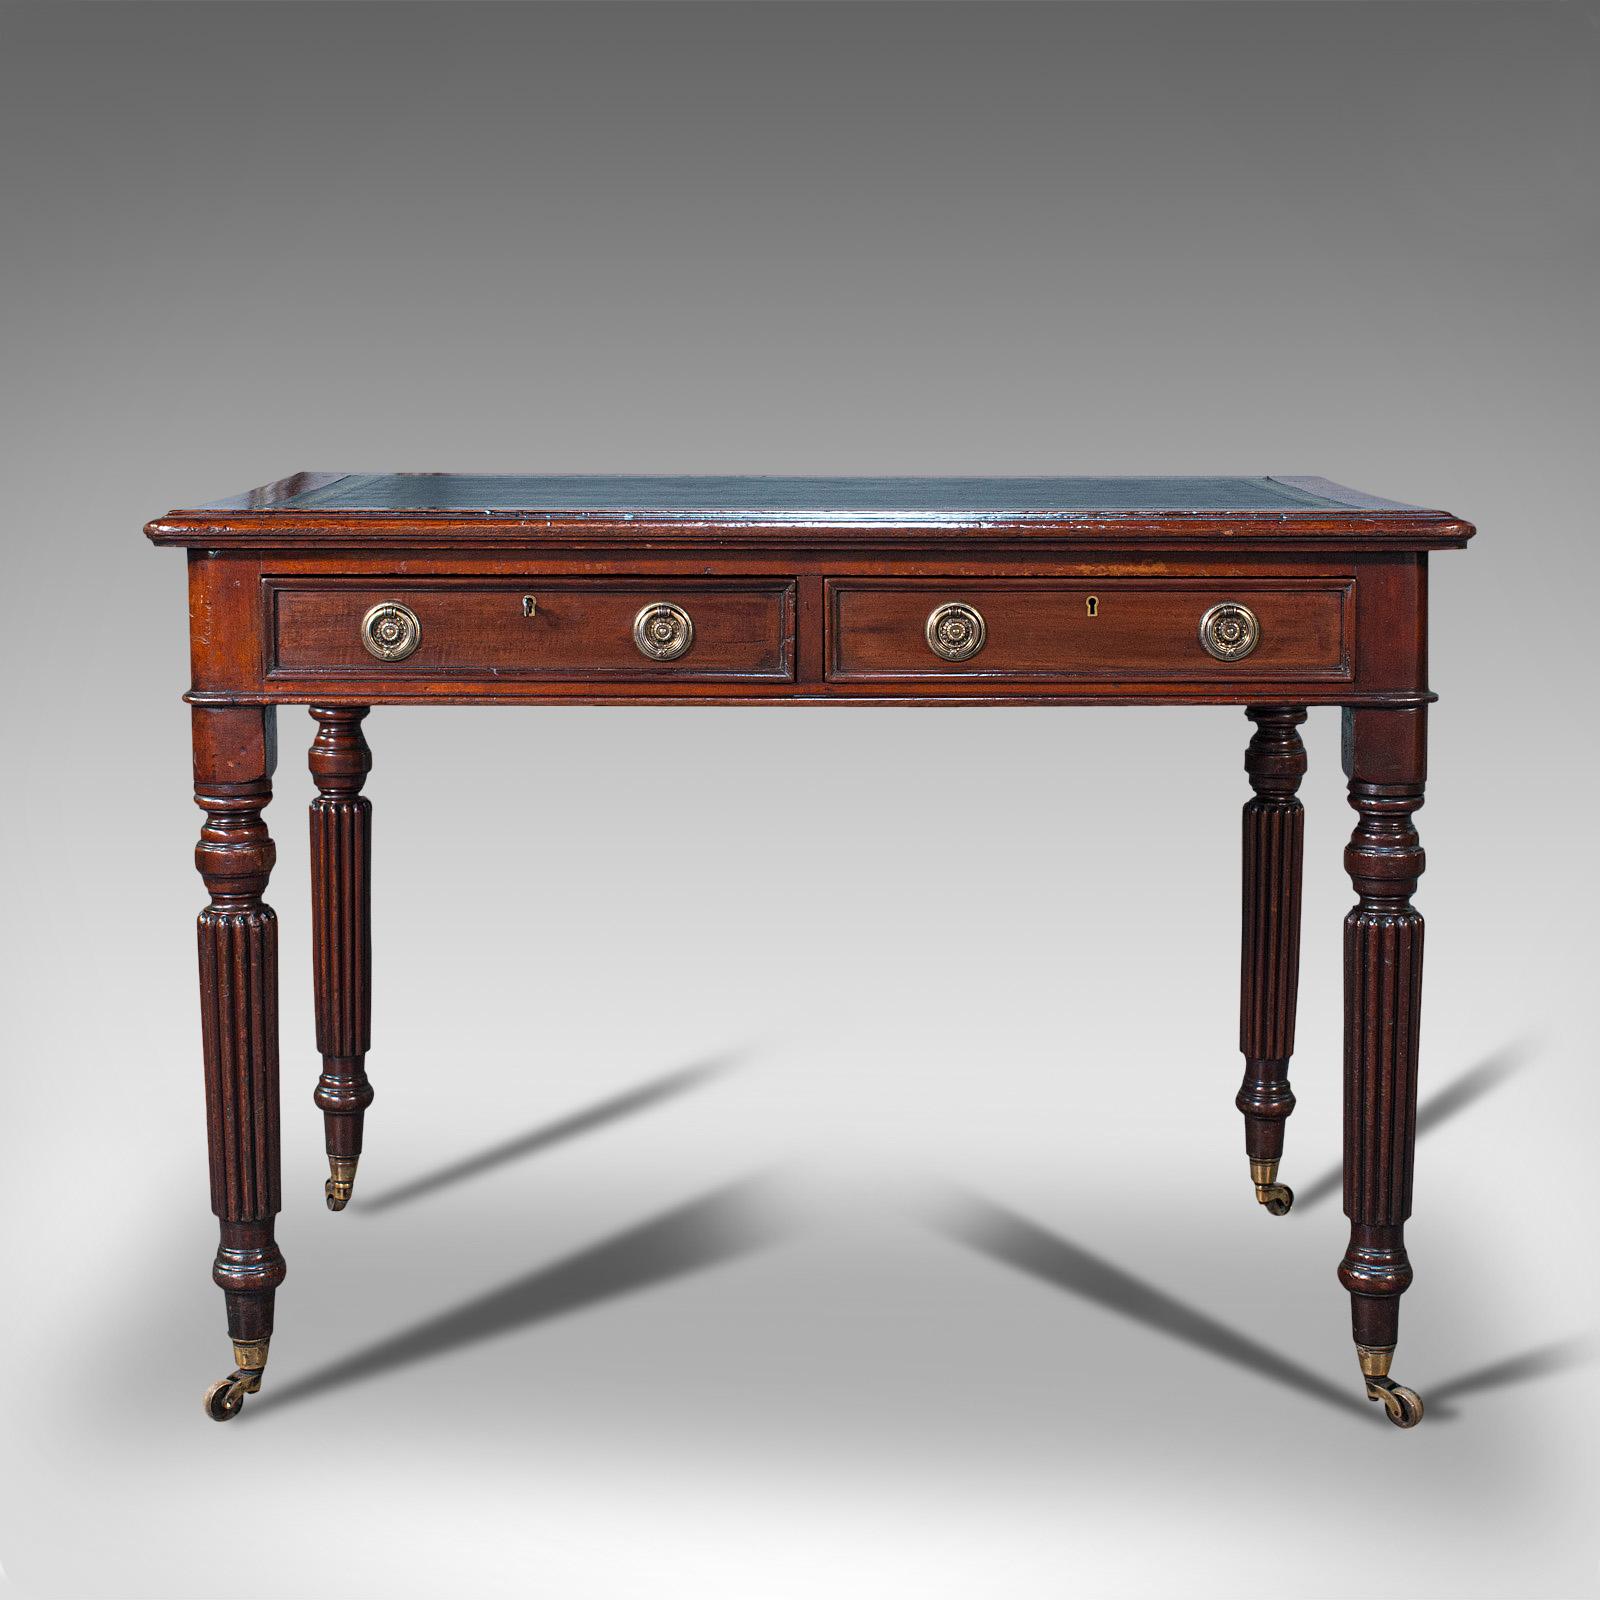 This is an antique correspondence desk. An English, mahogany and leather writing table, dating to the Regency period, circa 1820.

Fine example of a classic staple from the Regency period
Displays a desirable aged patina throughout
Select